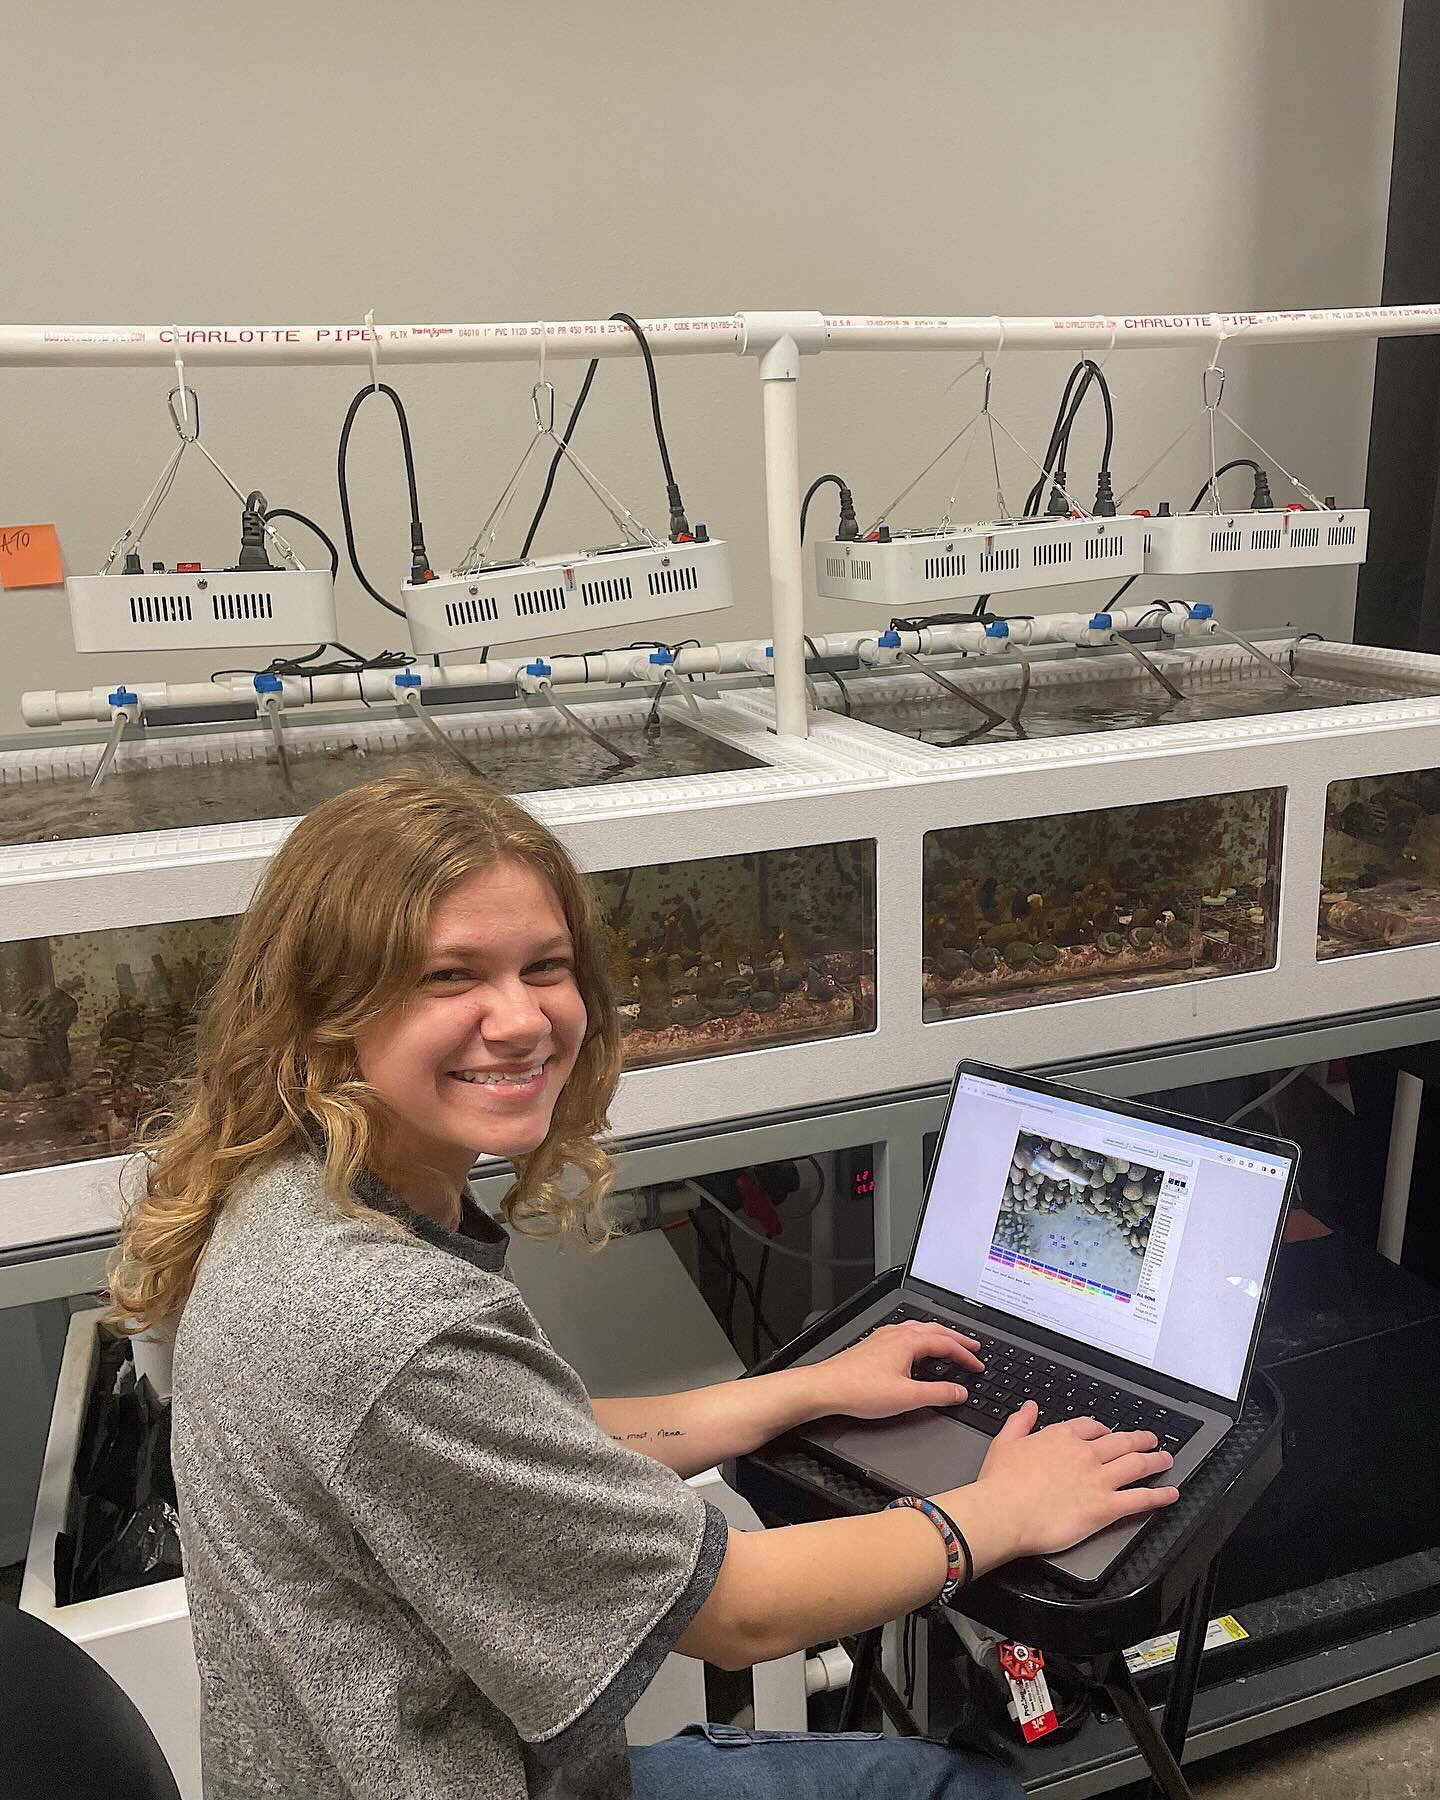 Hello everyone! 🌟

Soleil DeLorge, an undergraduate research intern at the Bahr Lab, is currently working on a Direct Independent Study (DIS). She&rsquo;s working alongside postbaccalaureate Eleanor TenBrink, who is serving as her mentor, and under 